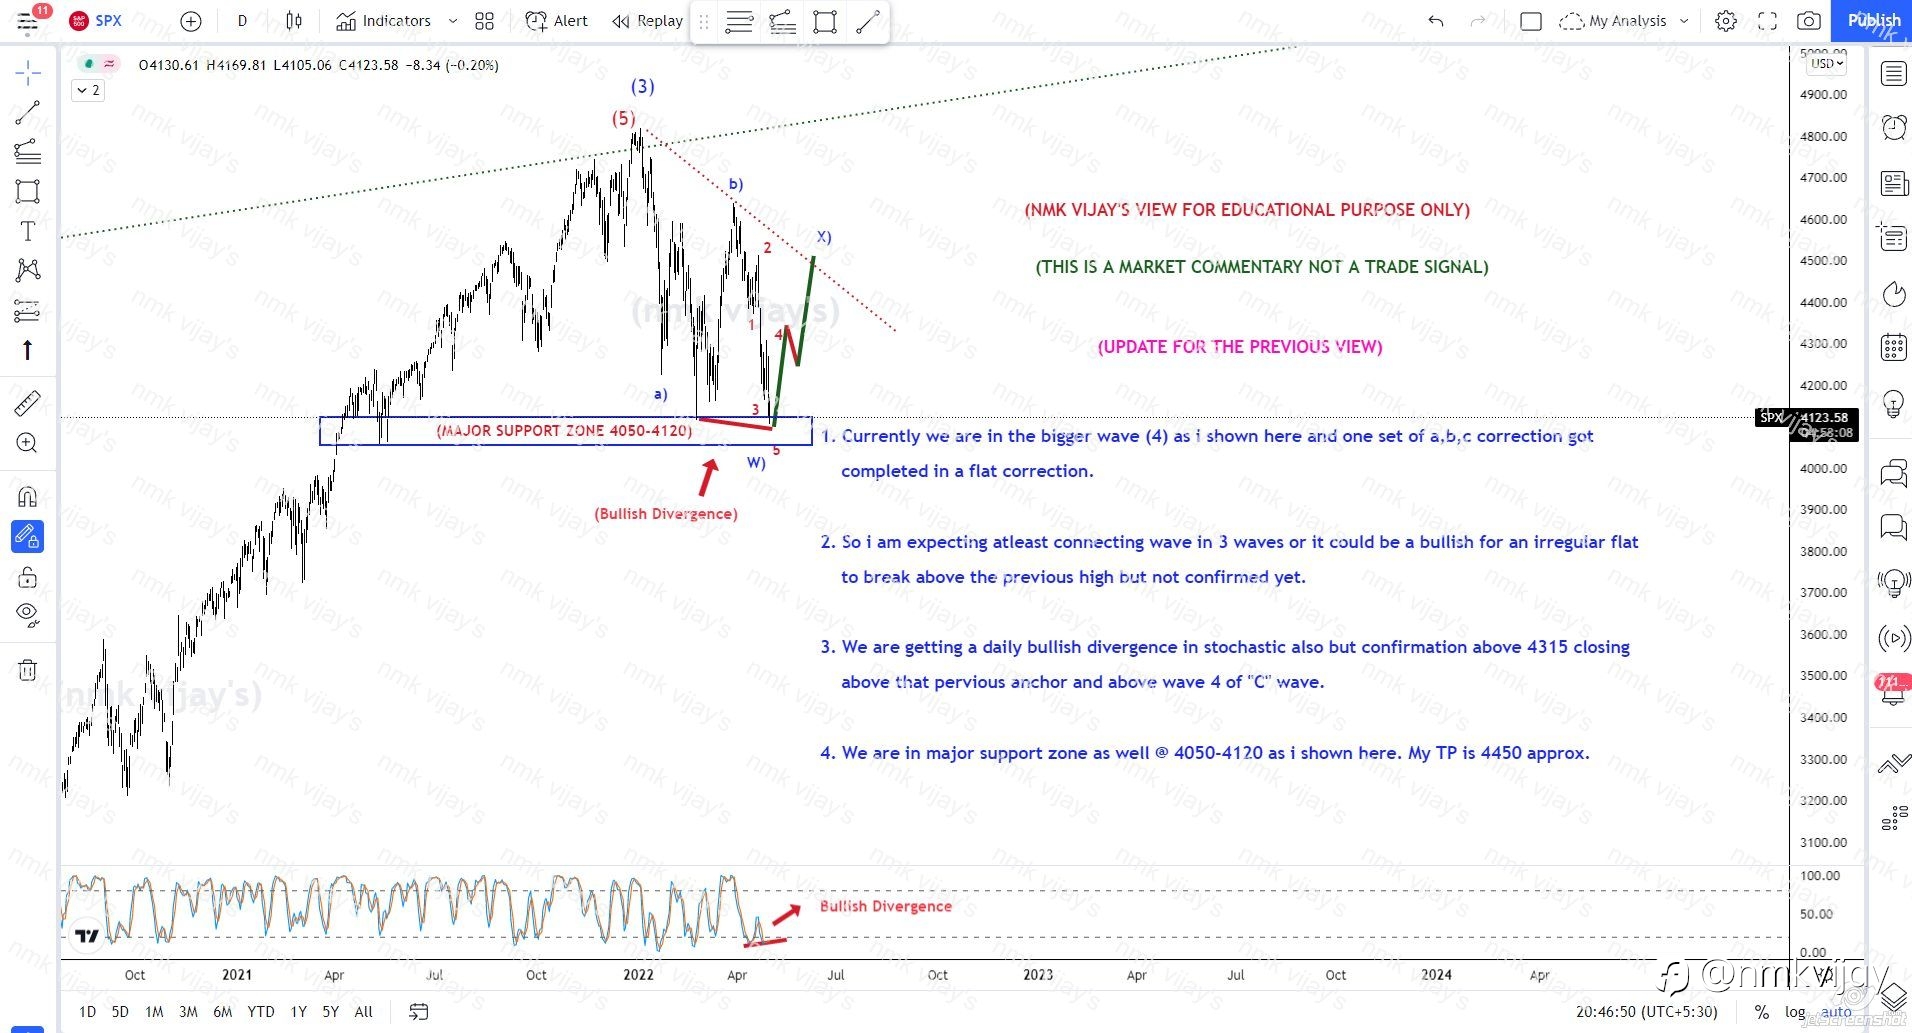 SPX-Major support zone 4050-4120 Bounce Expecting to 4450